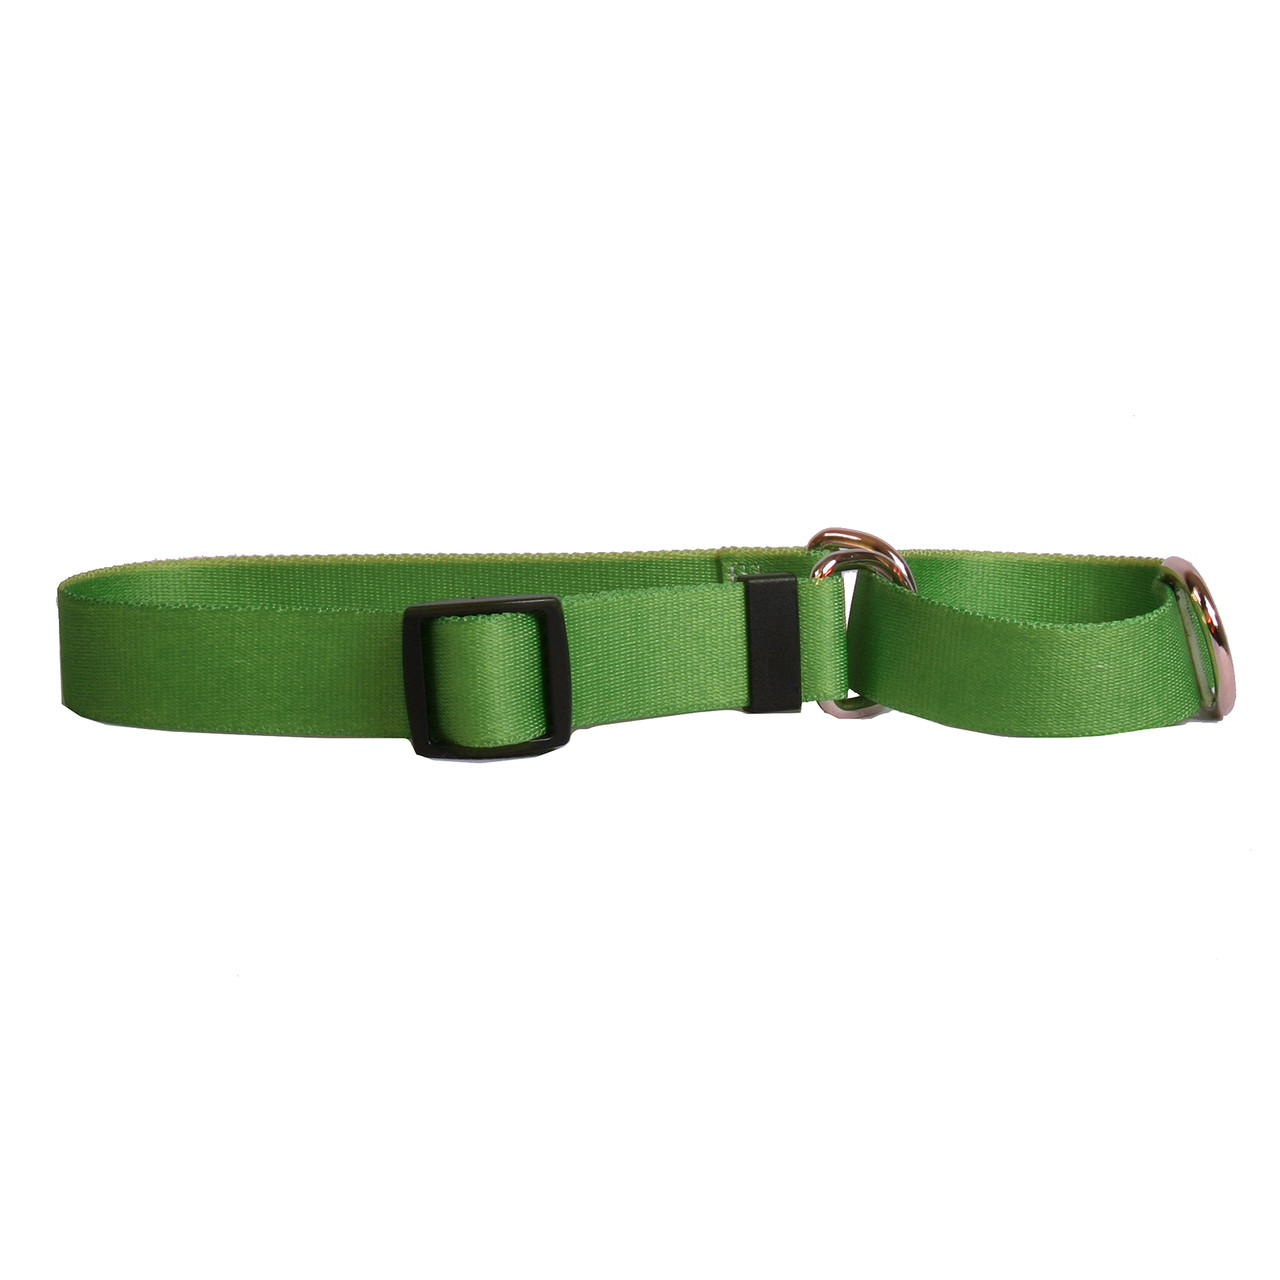 Simple Solids Martingale Dog Collar - $9.95